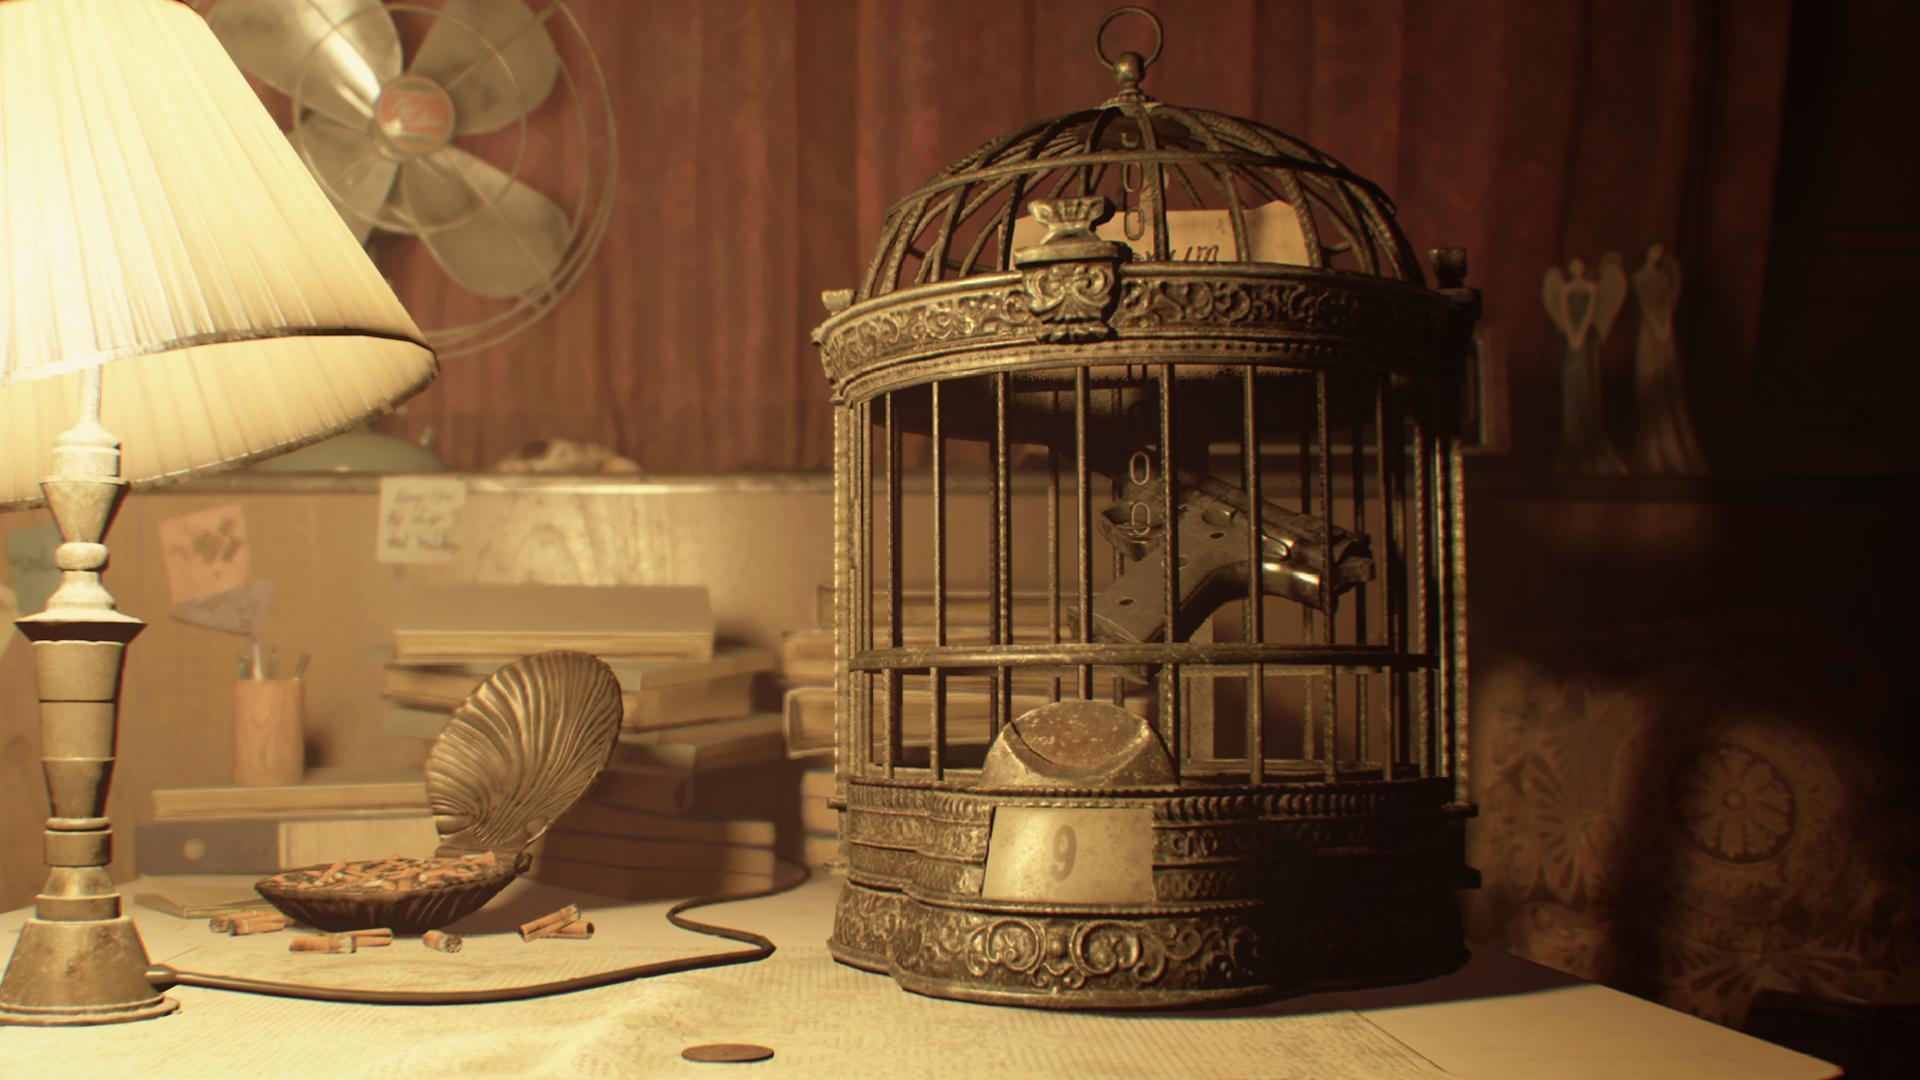 Experience the horrors of Resident Evil 7 Biohazard, available now